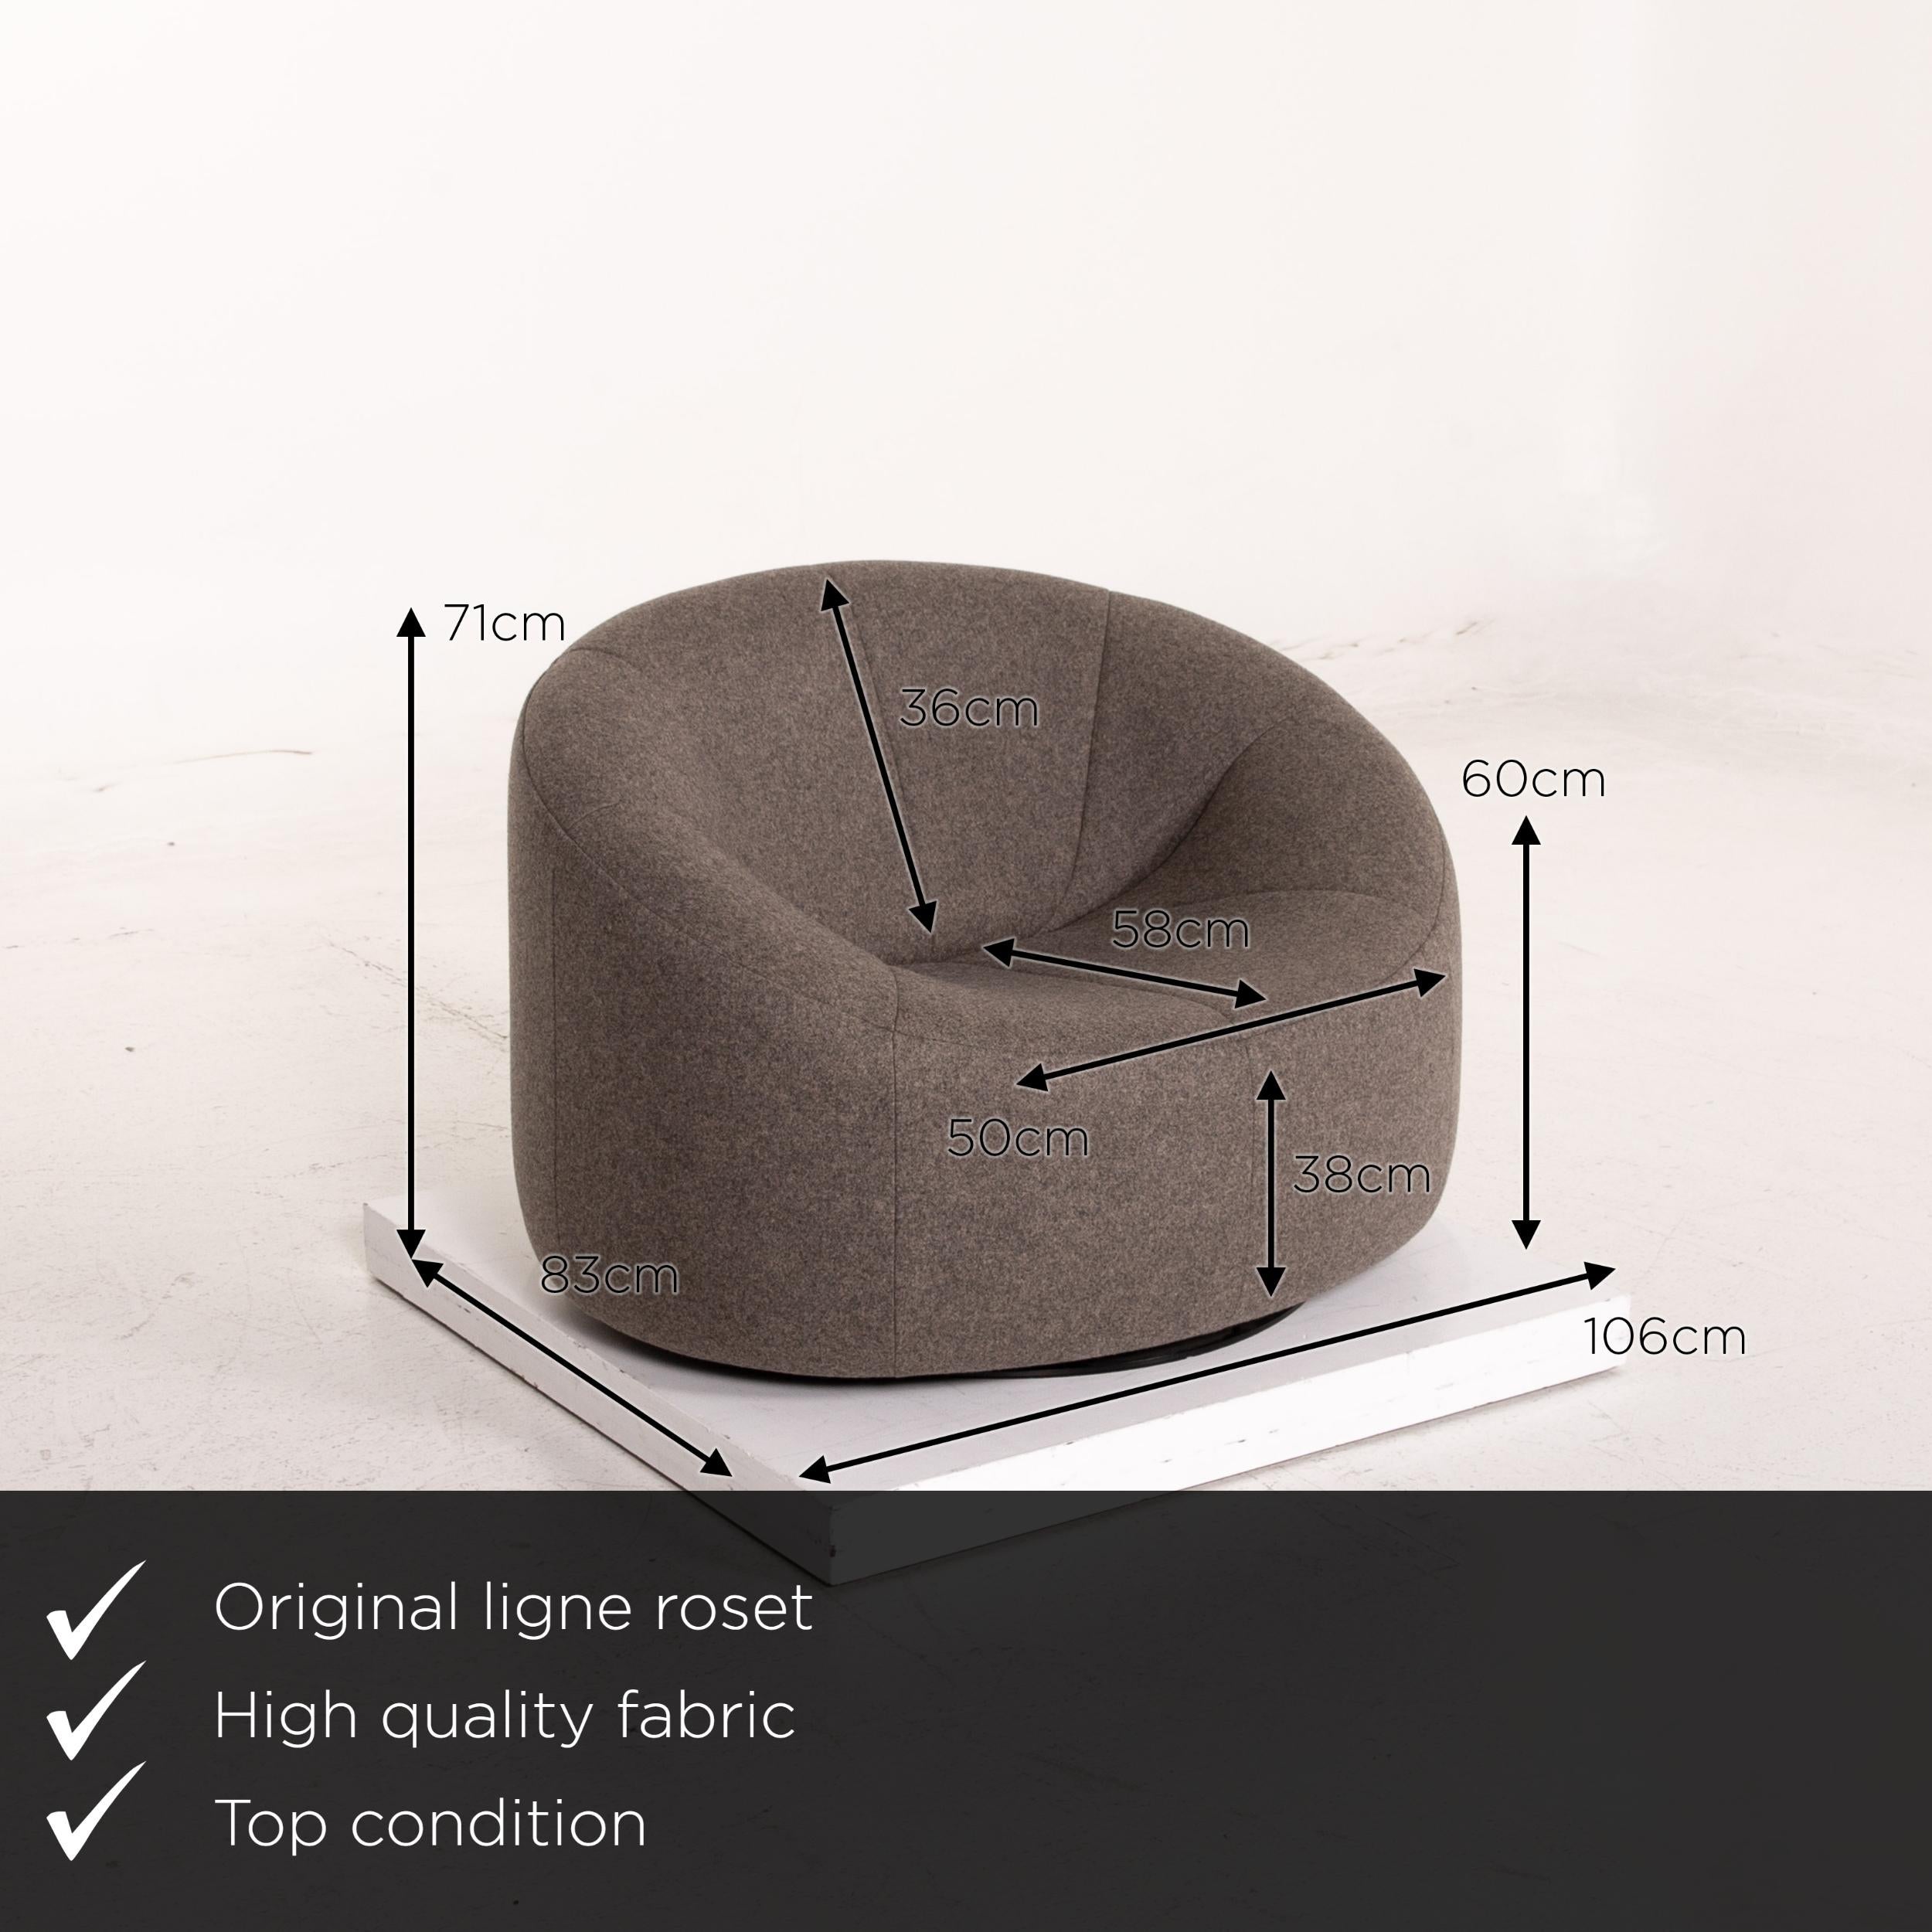 We present to you a Ligne Roset pumpkin fabric armchair anthracite gray Pierre Paulin.
  
 

 Product measurements in centimeters:
 

Depth 83
Width 106
Height 71
Seat height 38
Rest height 60
Seat depth 58
Seat width 50
Back height 36.